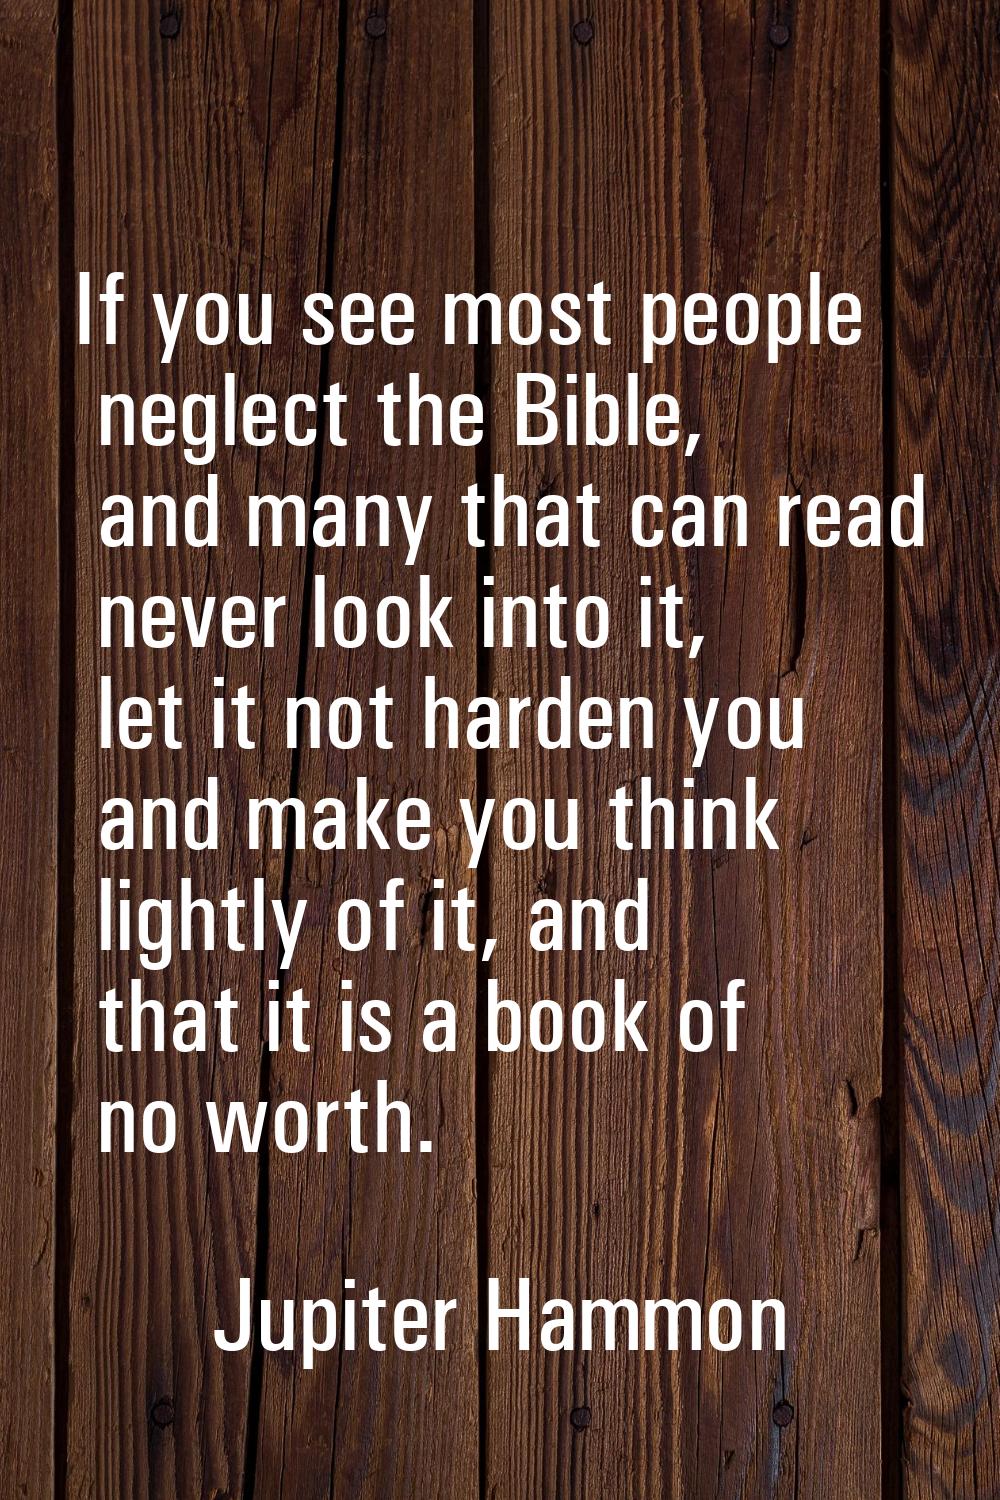 If you see most people neglect the Bible, and many that can read never look into it, let it not har